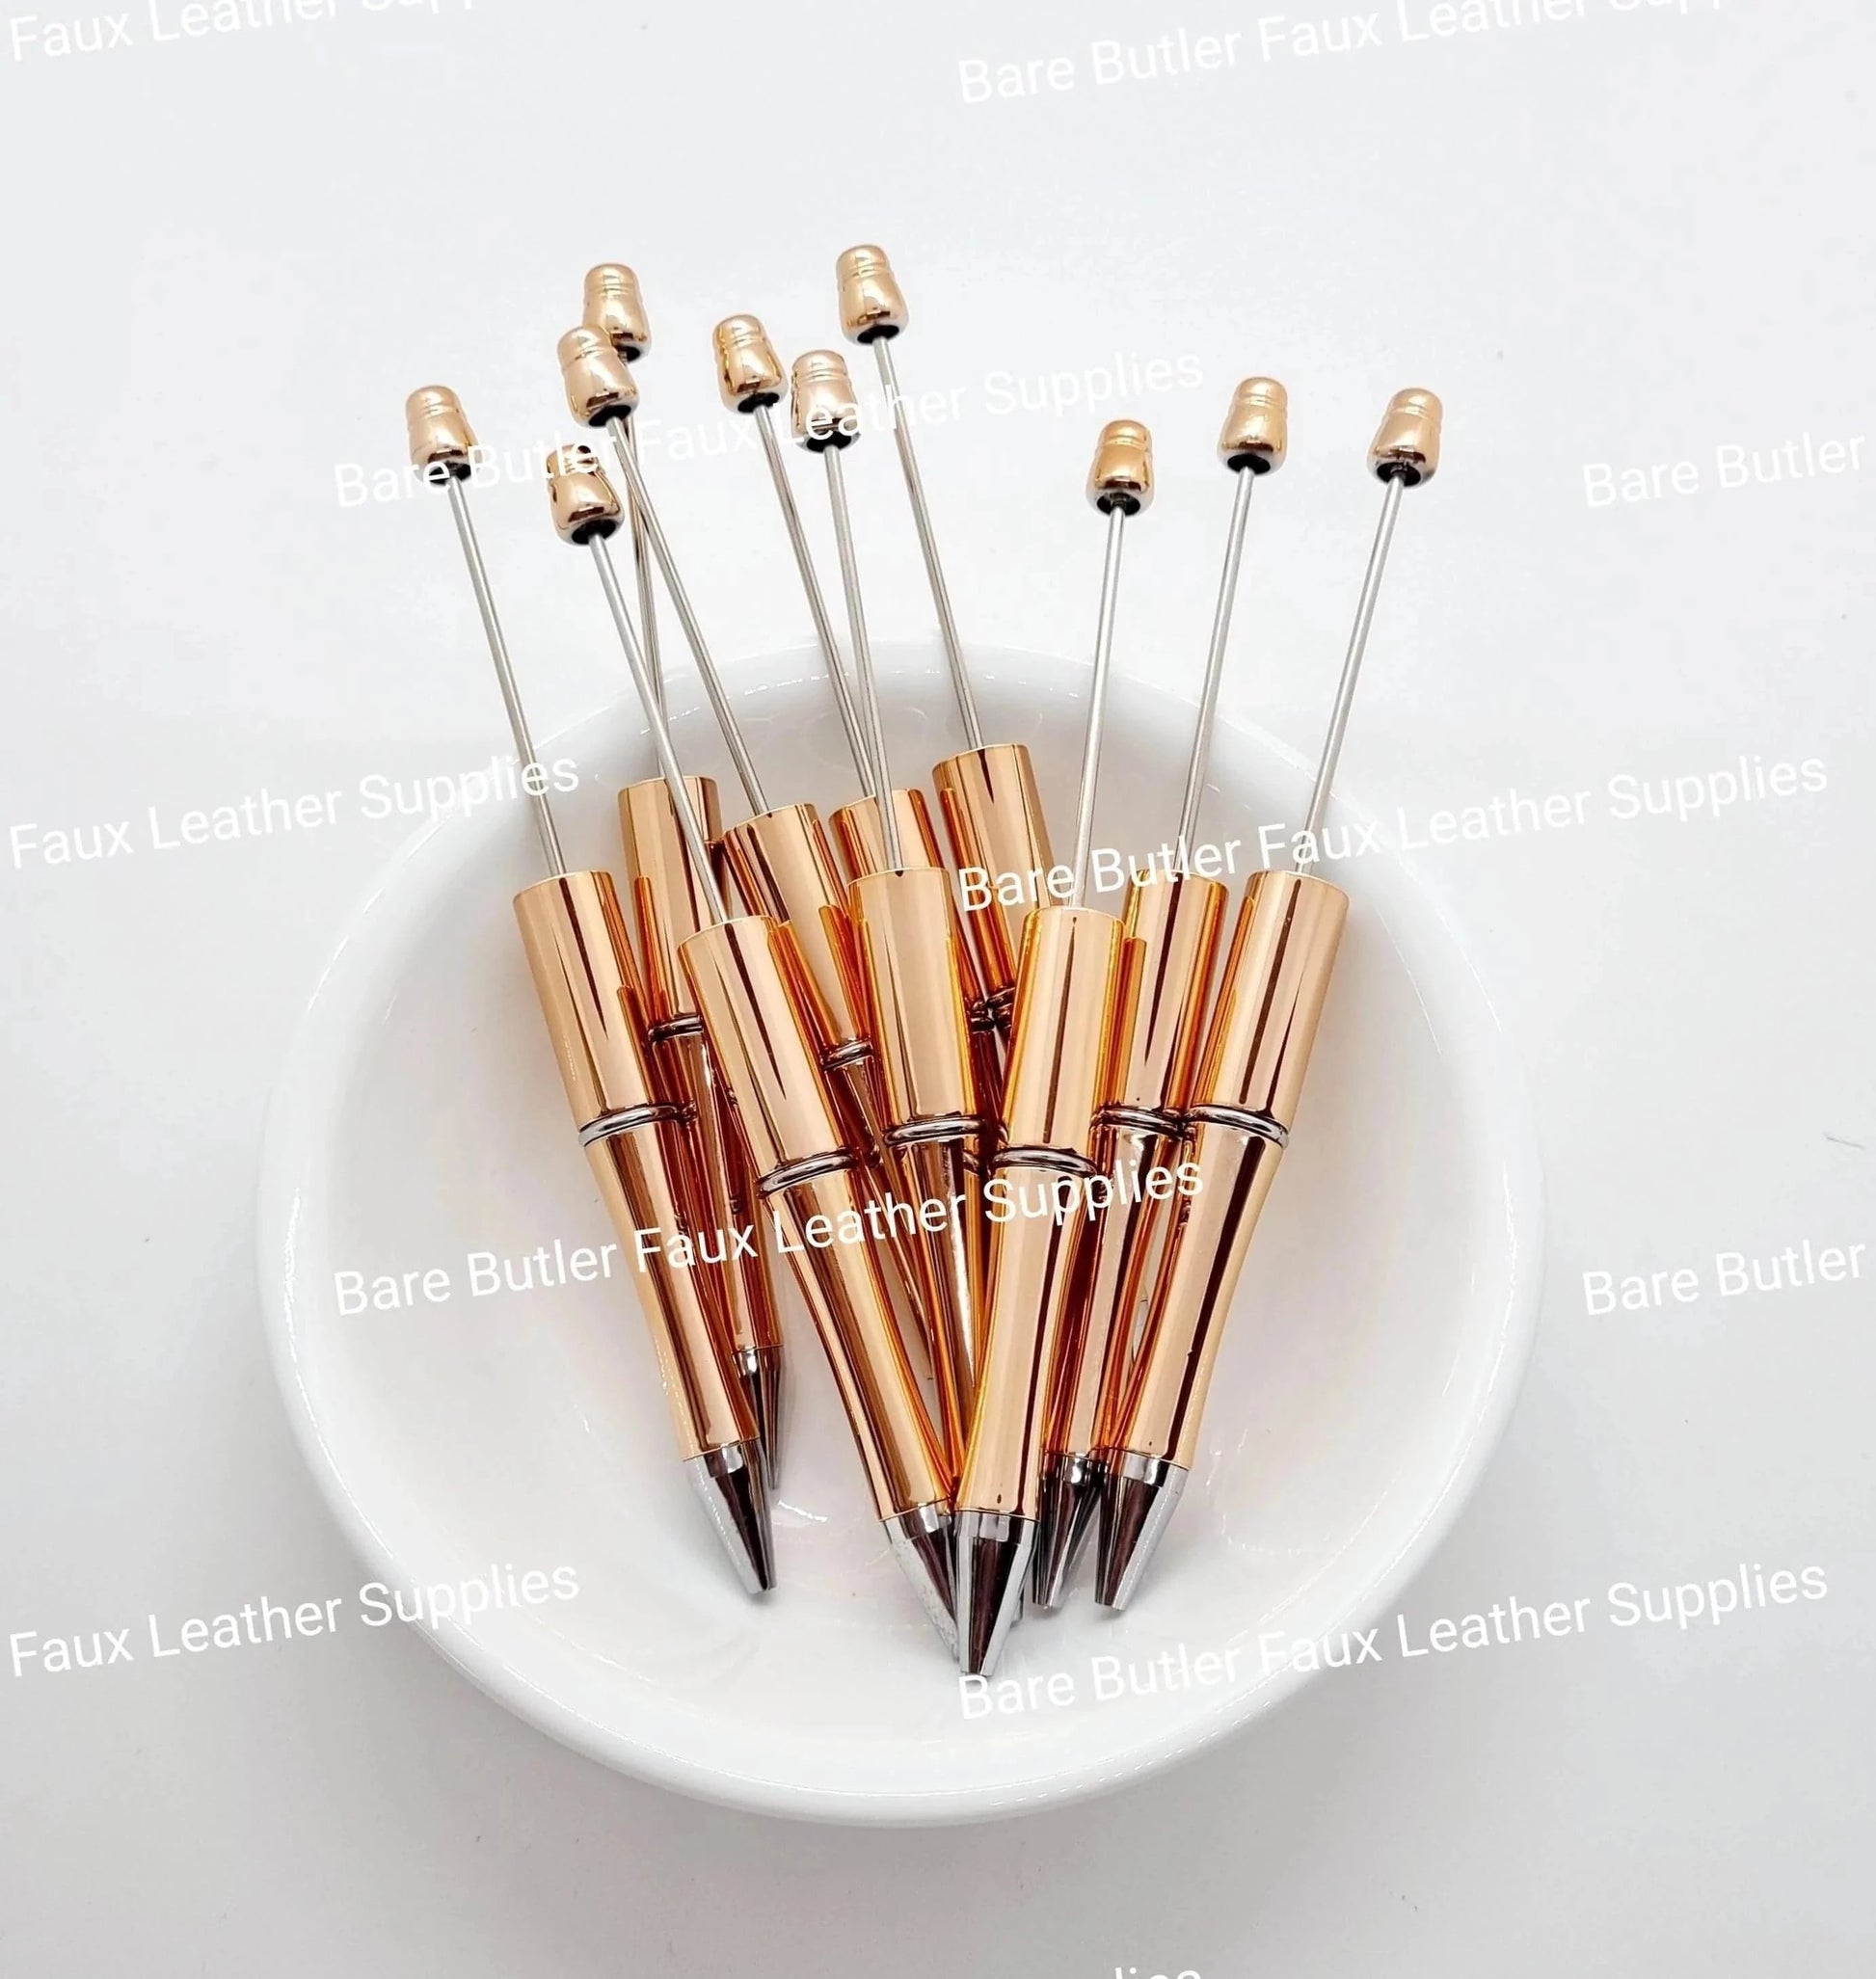 Rose Gold Metallic Bead Pen Blanks 2 pack -  - Bare Butler Faux Leather Supplies 